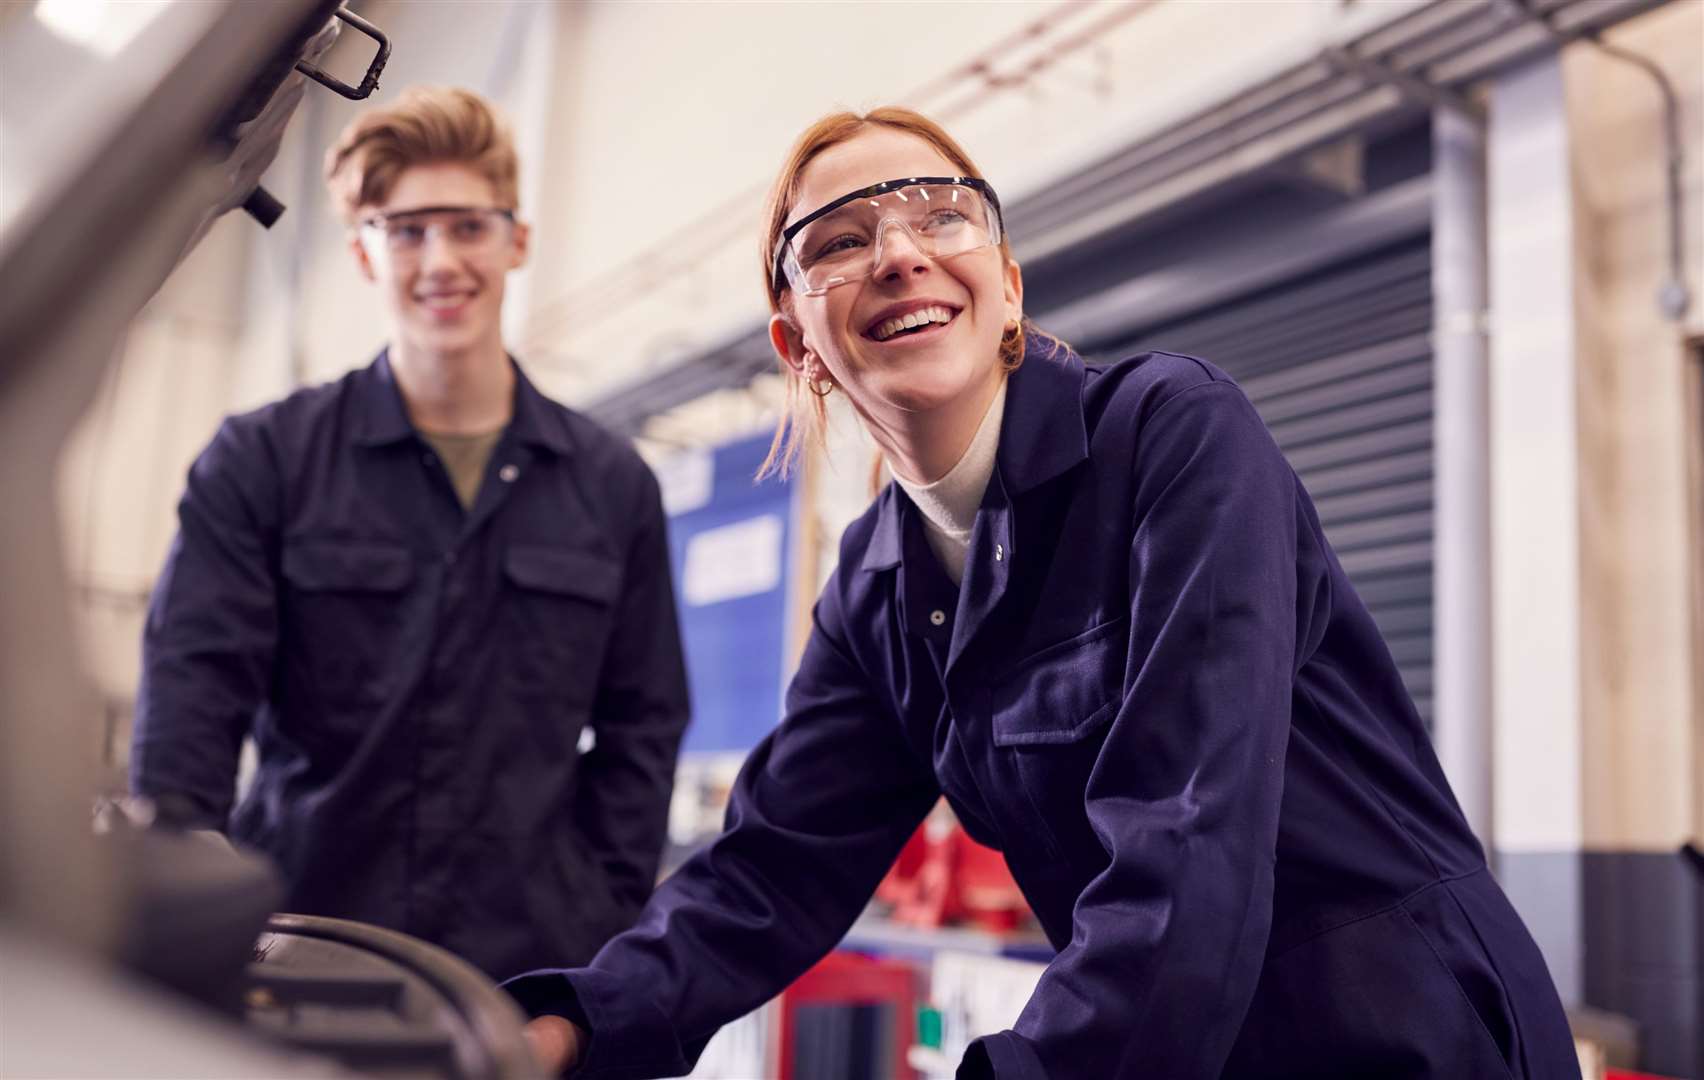 Apprenticeships are seen as a great way to train while getting paid - but numbers are falling dramatically. Picture: iStock